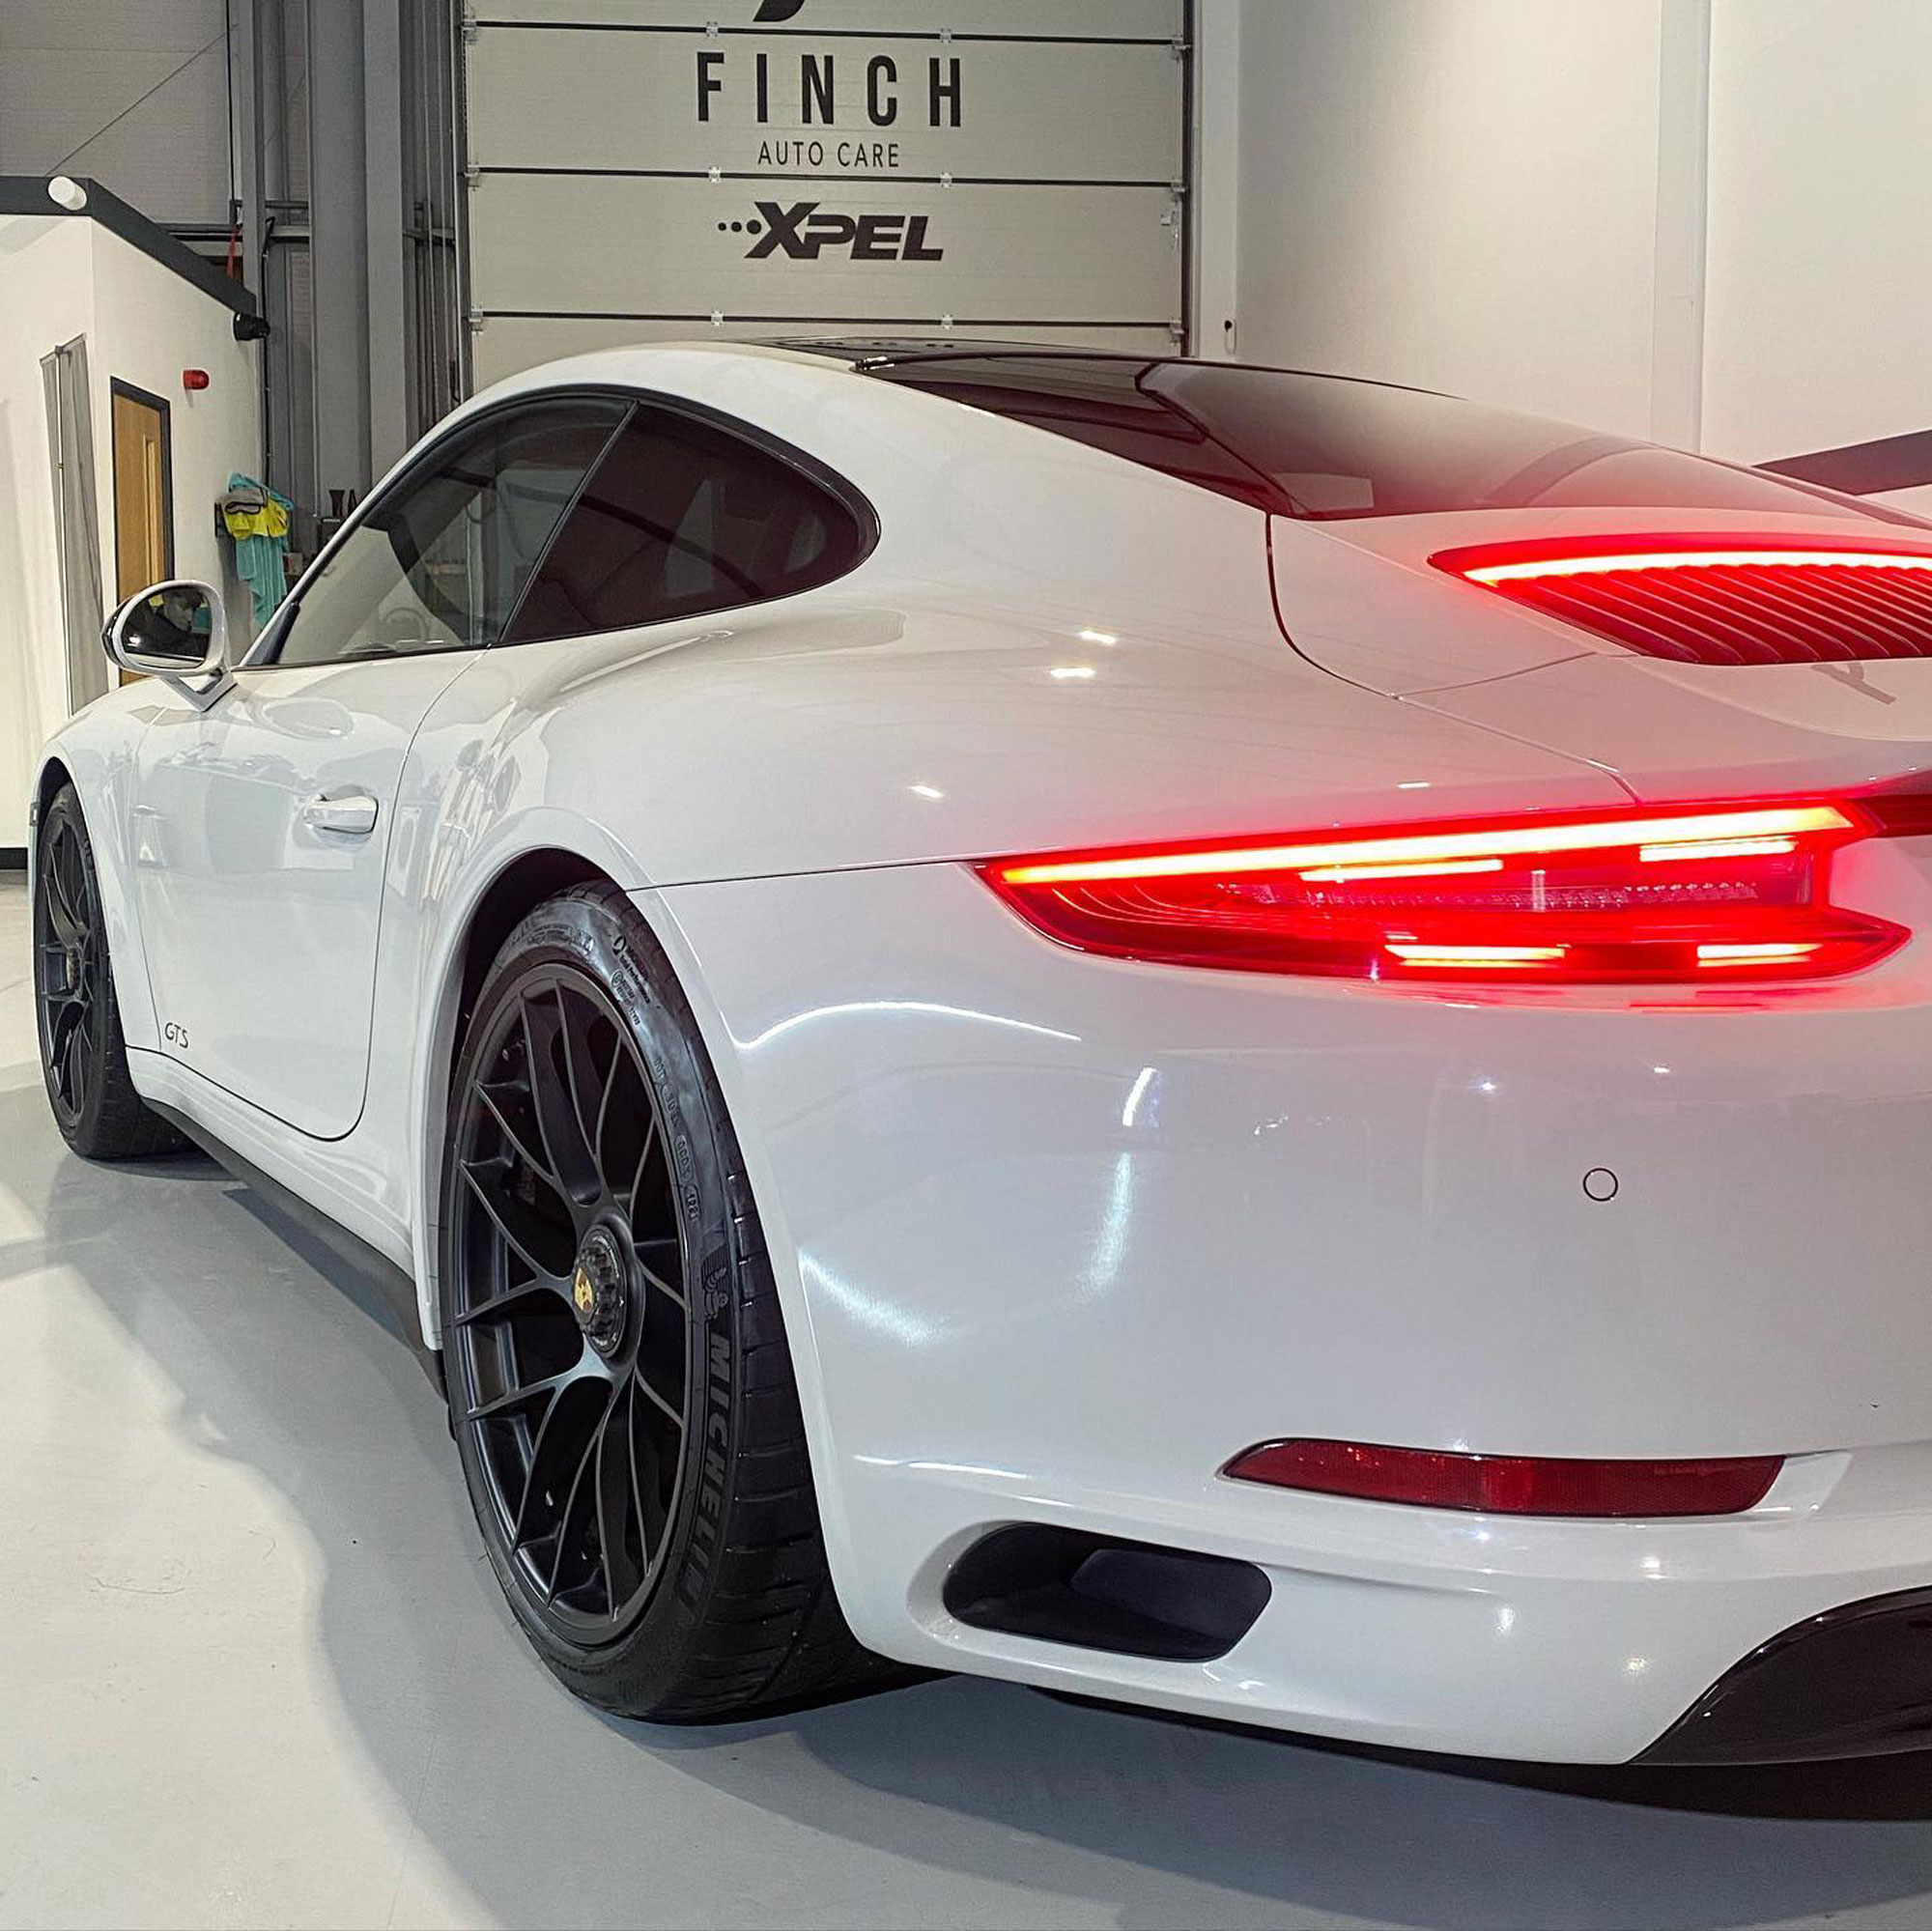 White porsche 911 with distinctive tail lights parked in an auto care workshop.